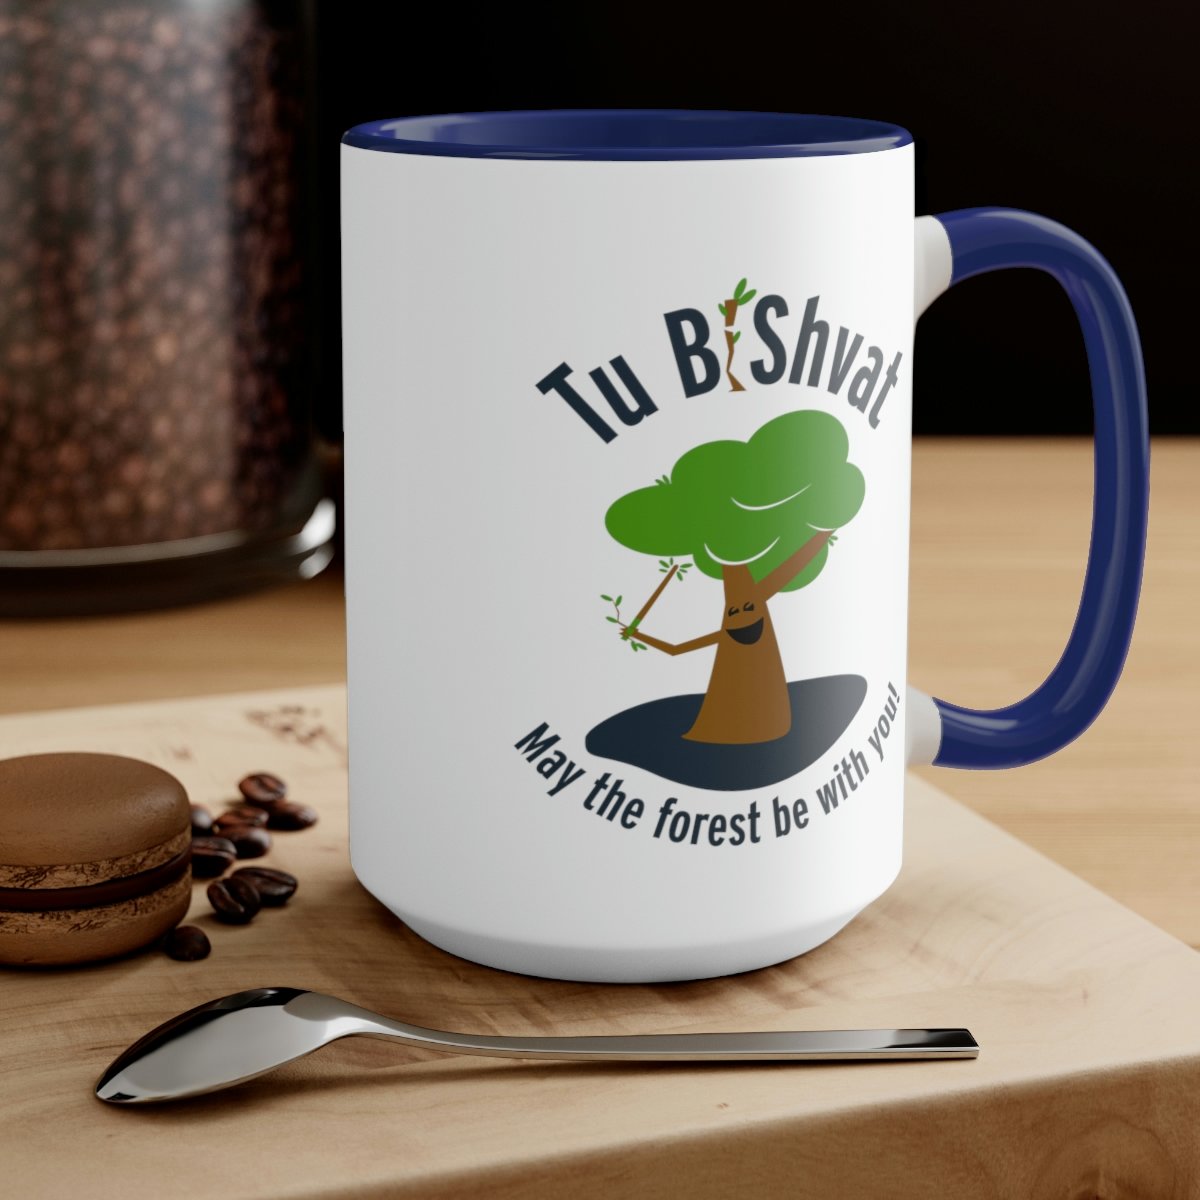 May the forest be with you! Two-Tone Coffee Mugs, 15oz